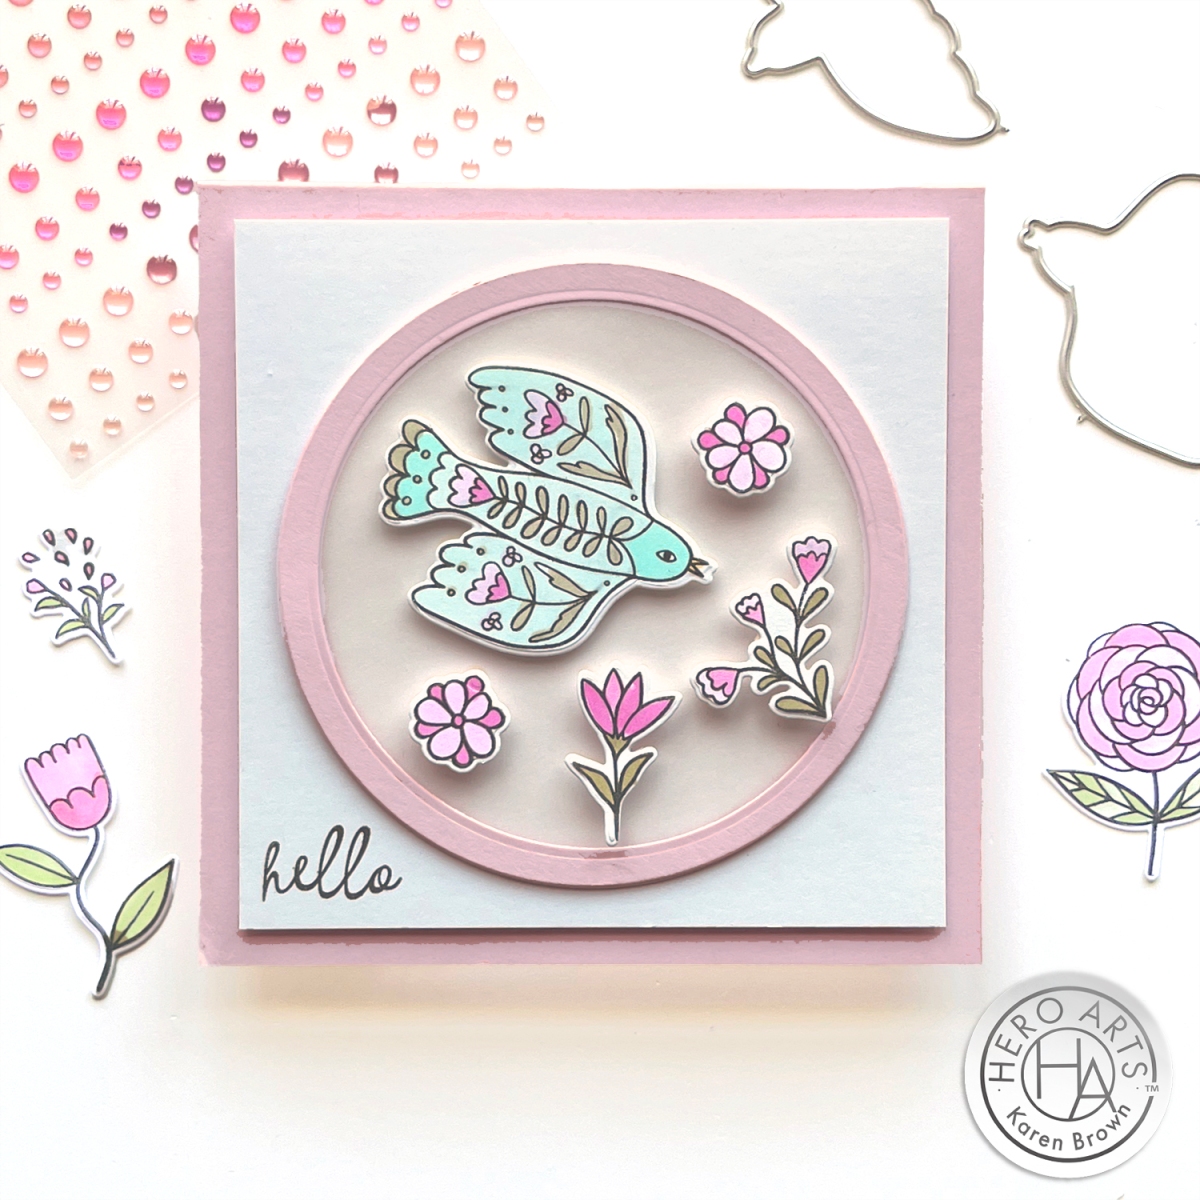 Charming Folk Art stamp and die cut scene with soaring bird and pink floral elements with a vellum insert.